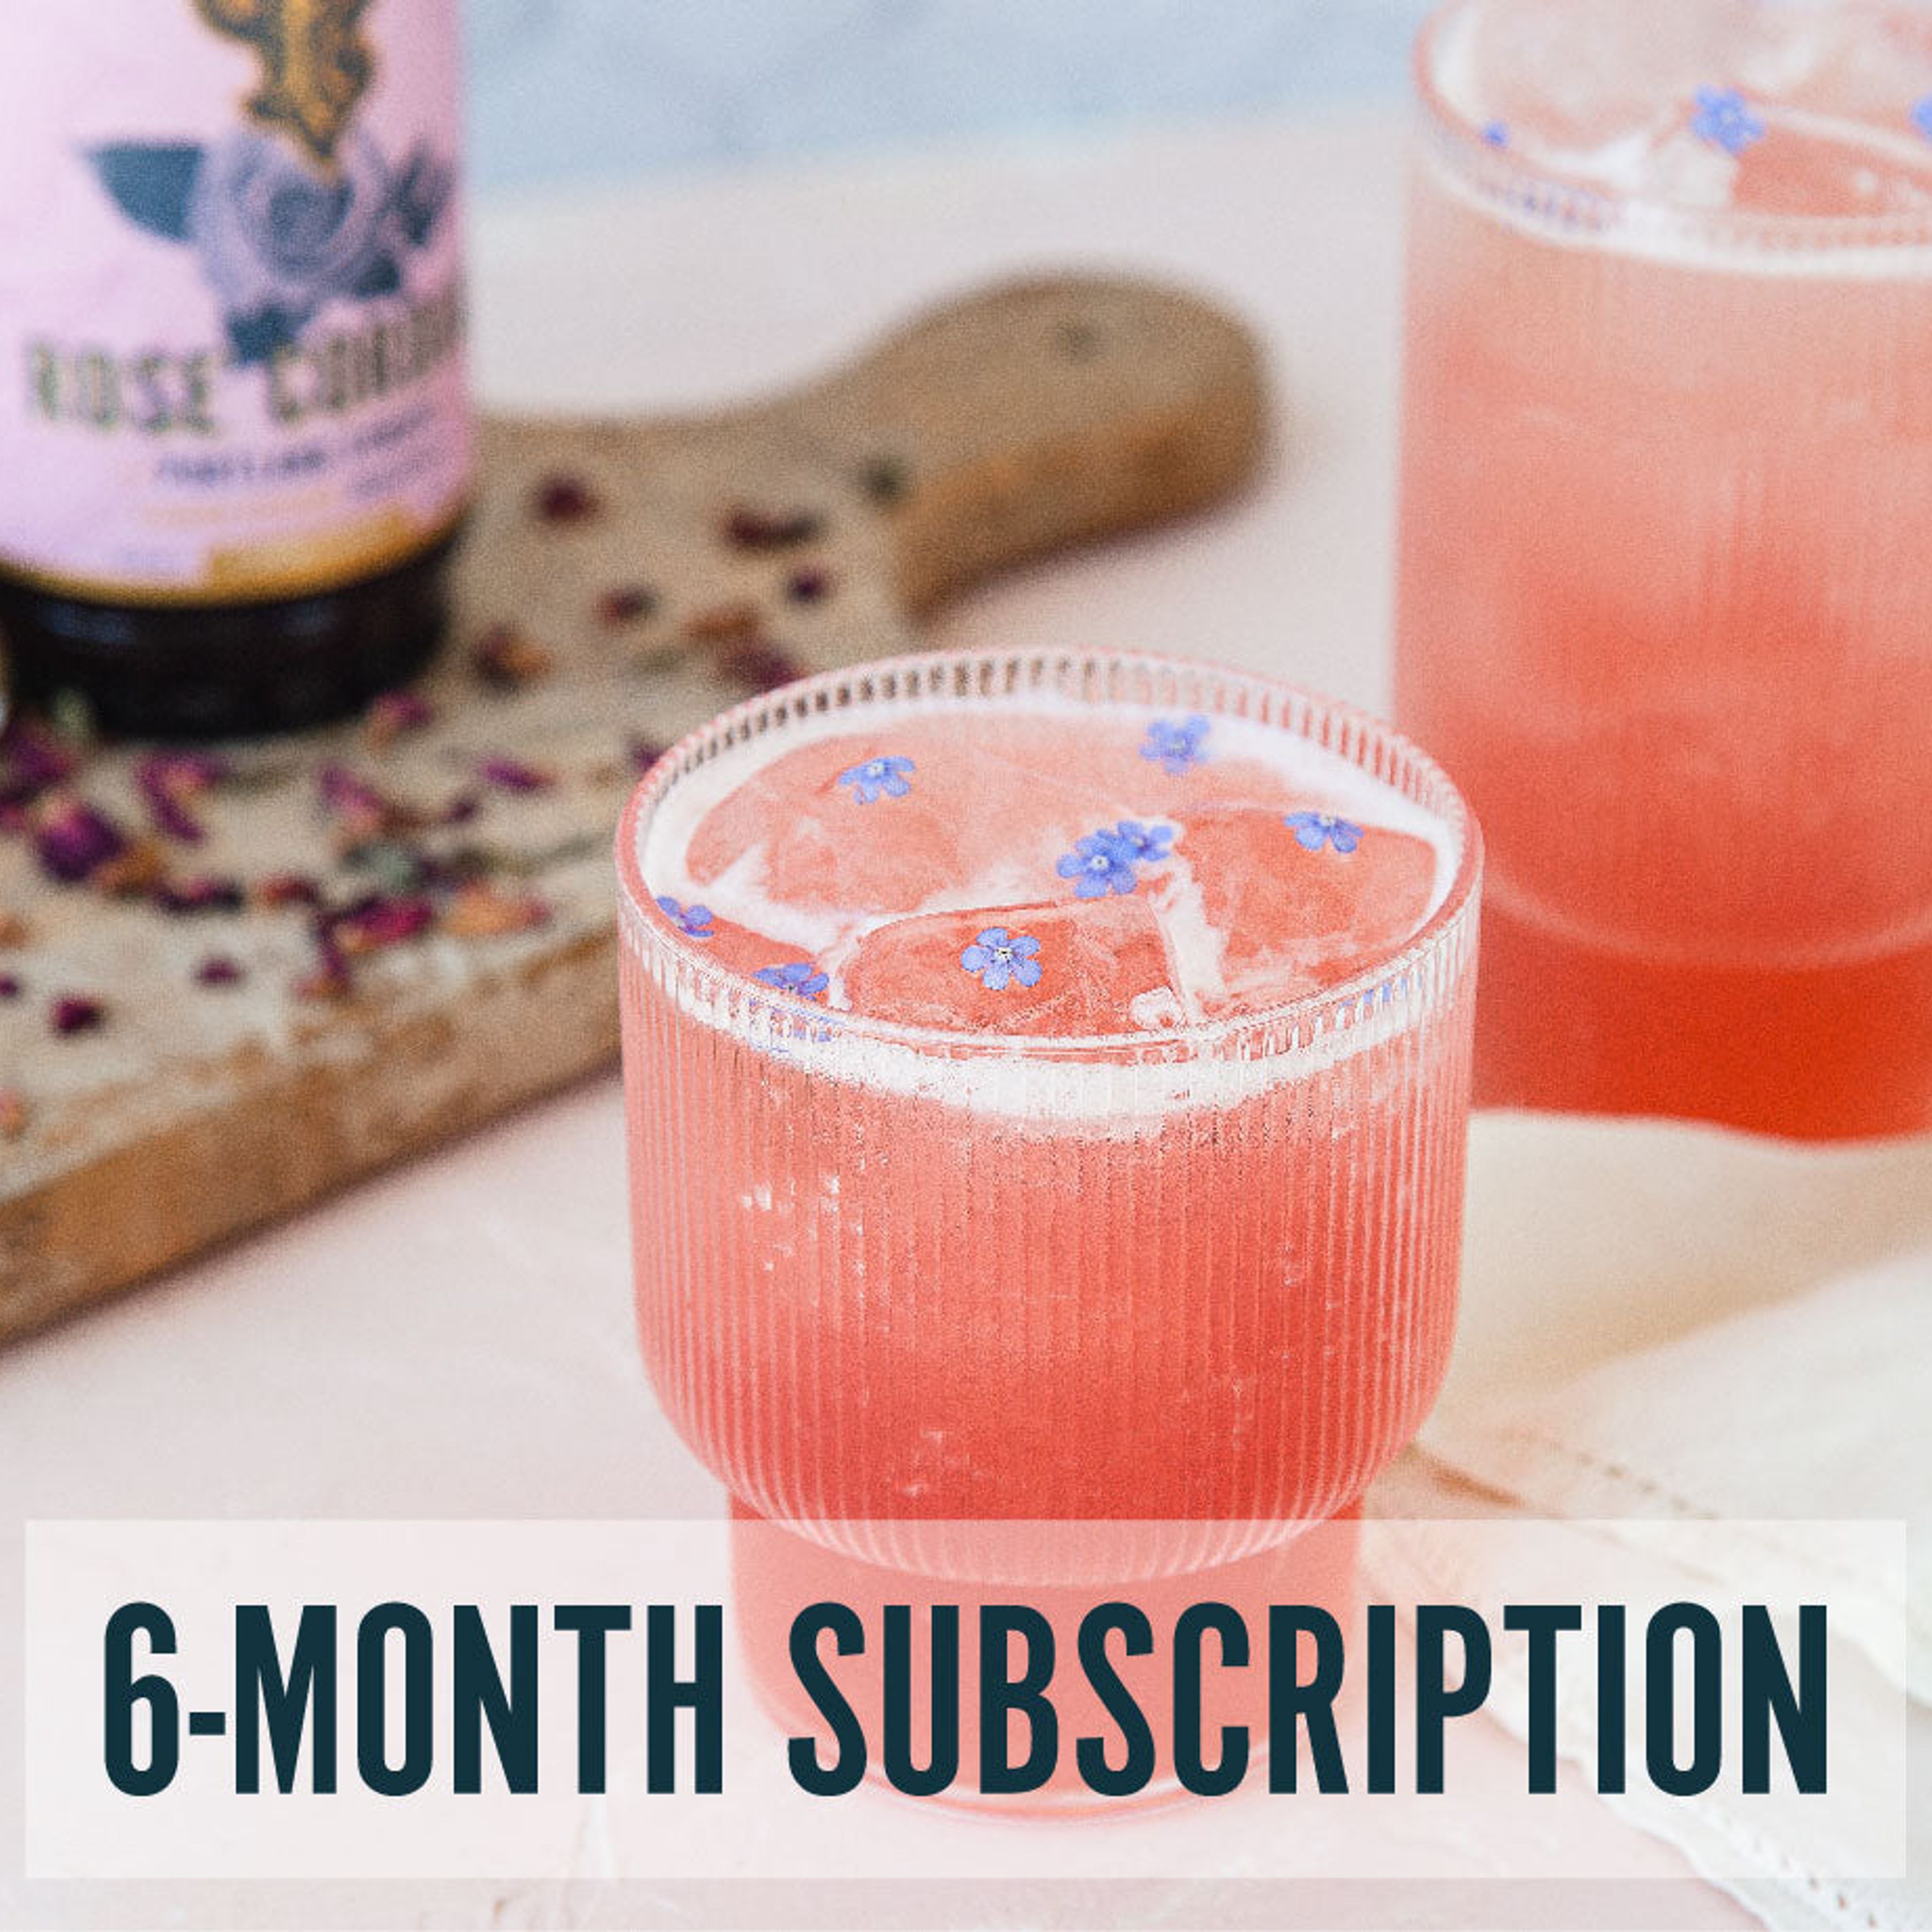 6-month Subscription